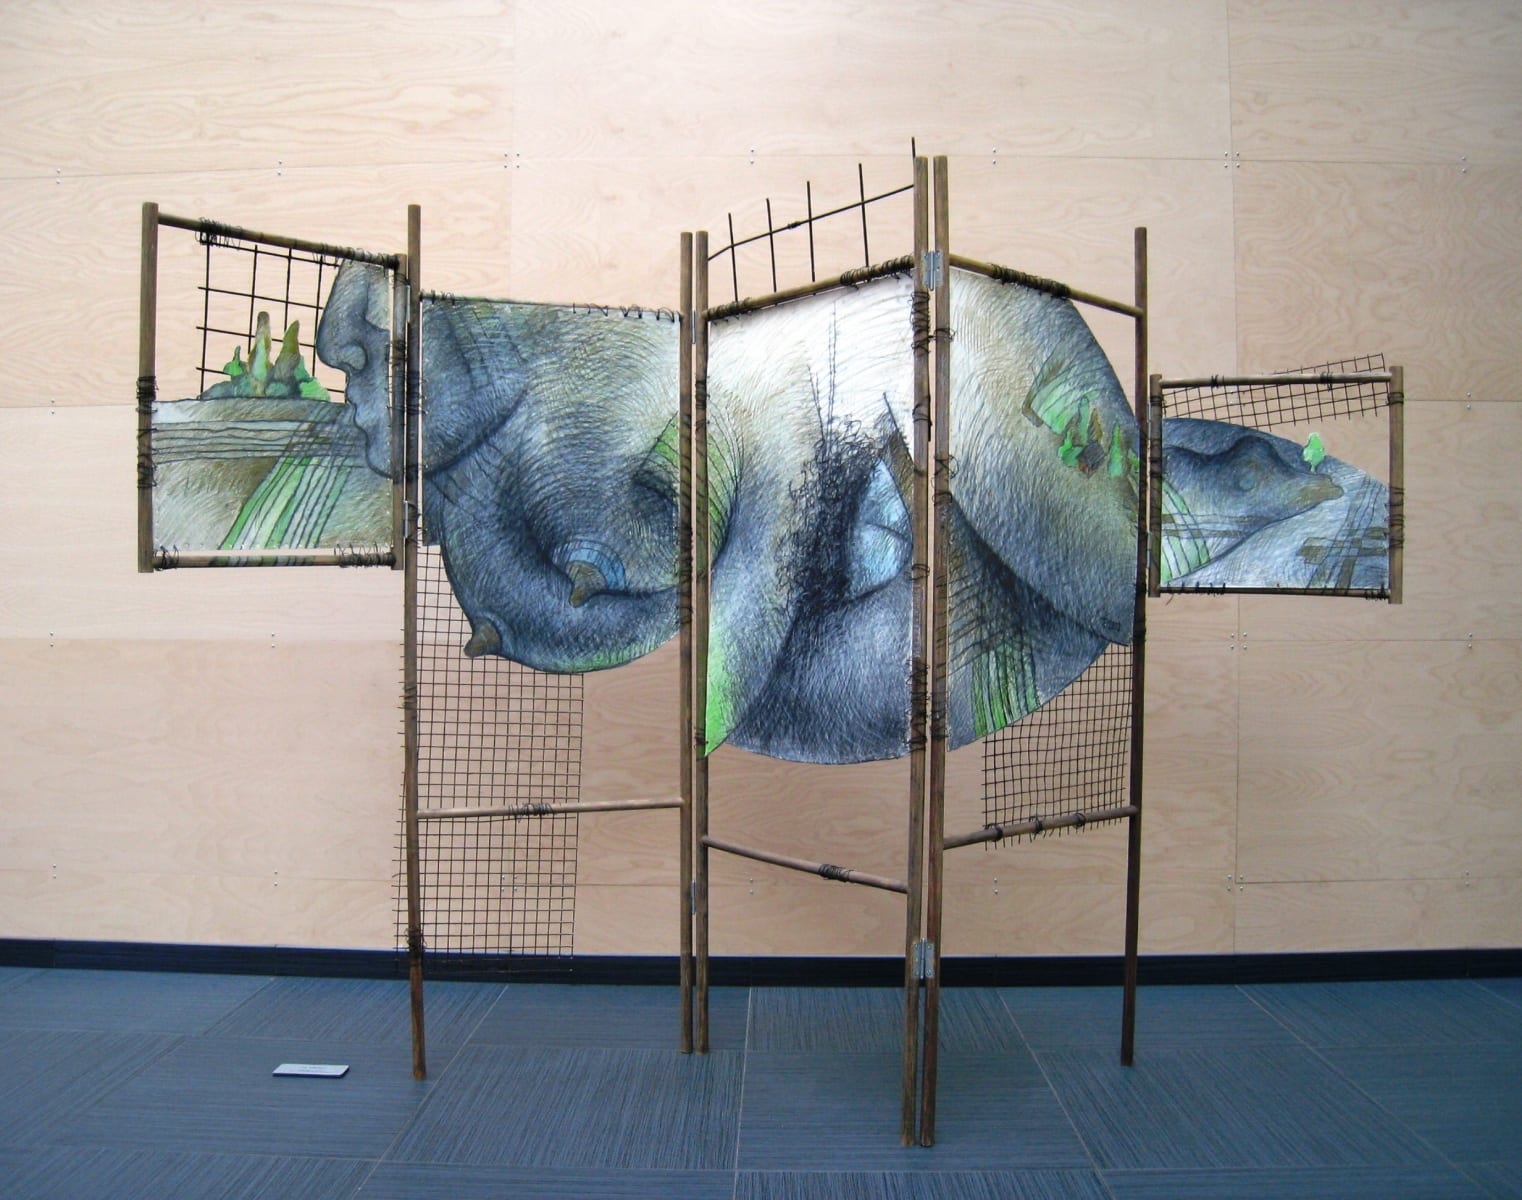 Sirm "MAAEMA" 2002 puu, paber, metall Screen<br /> "MOTHER of the EARTH" 2002 wood, paper, metal